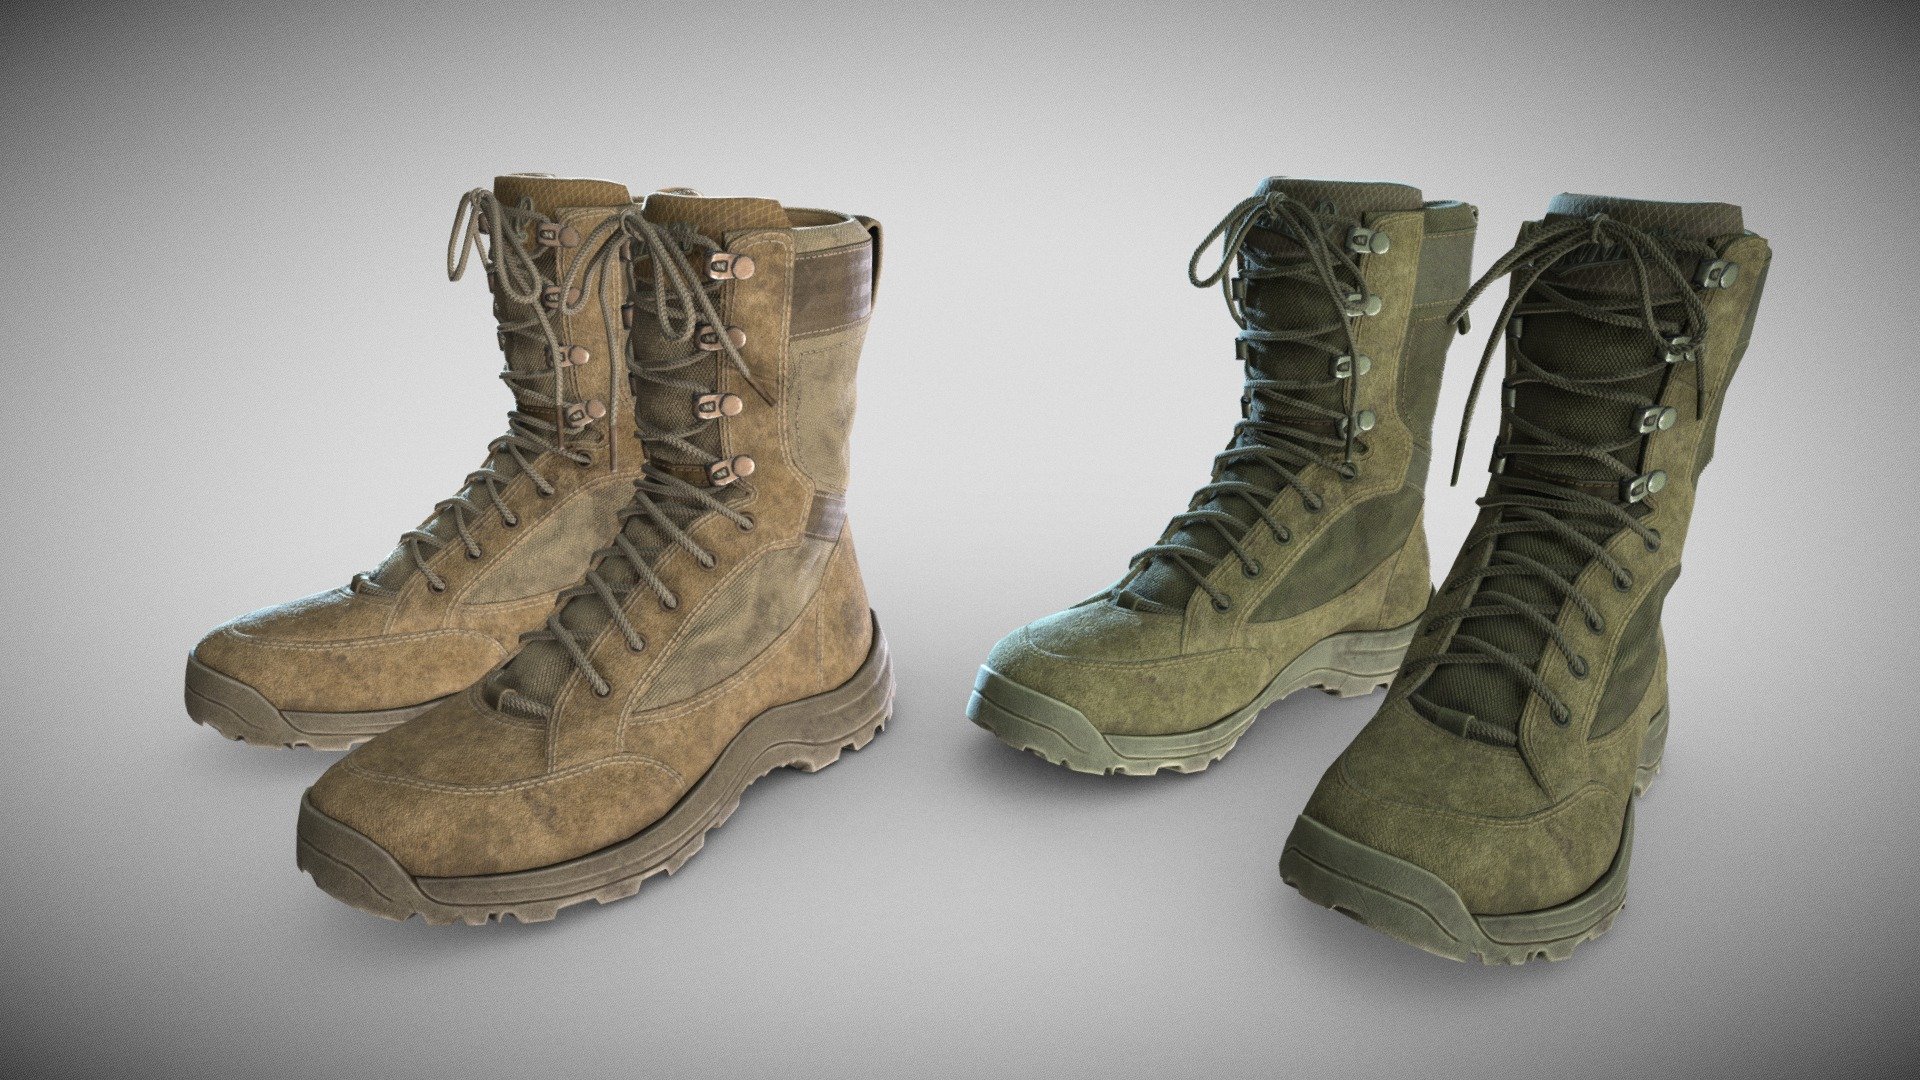 Game-Ready PBR low-poly model of tactical boots.
All materials and textures are included.
The textures of the model are applied with UV Unwrap.
Normal map was baked from a high poly model.
Including 3dsmax and Blender, OBJ and FBX.

5194 polygons
9052 triangles
4756 vertices

Maps:

boot_Normal.tga, boot_Specular.tga, boot_Metallic.tga, boot_AO.tga, boot_Diffuse_Sand, boot_Diffuse_Green, boot_Curvature.tga, boot_Glossiness.tga, boot_Roughness.tga, boot_BaseColor_Sand.tga, boot_BaseColor_Green.tga (2048x2048) - Tactical boots - Buy Royalty Free 3D model by alpenwolf (@alpen) 3d model